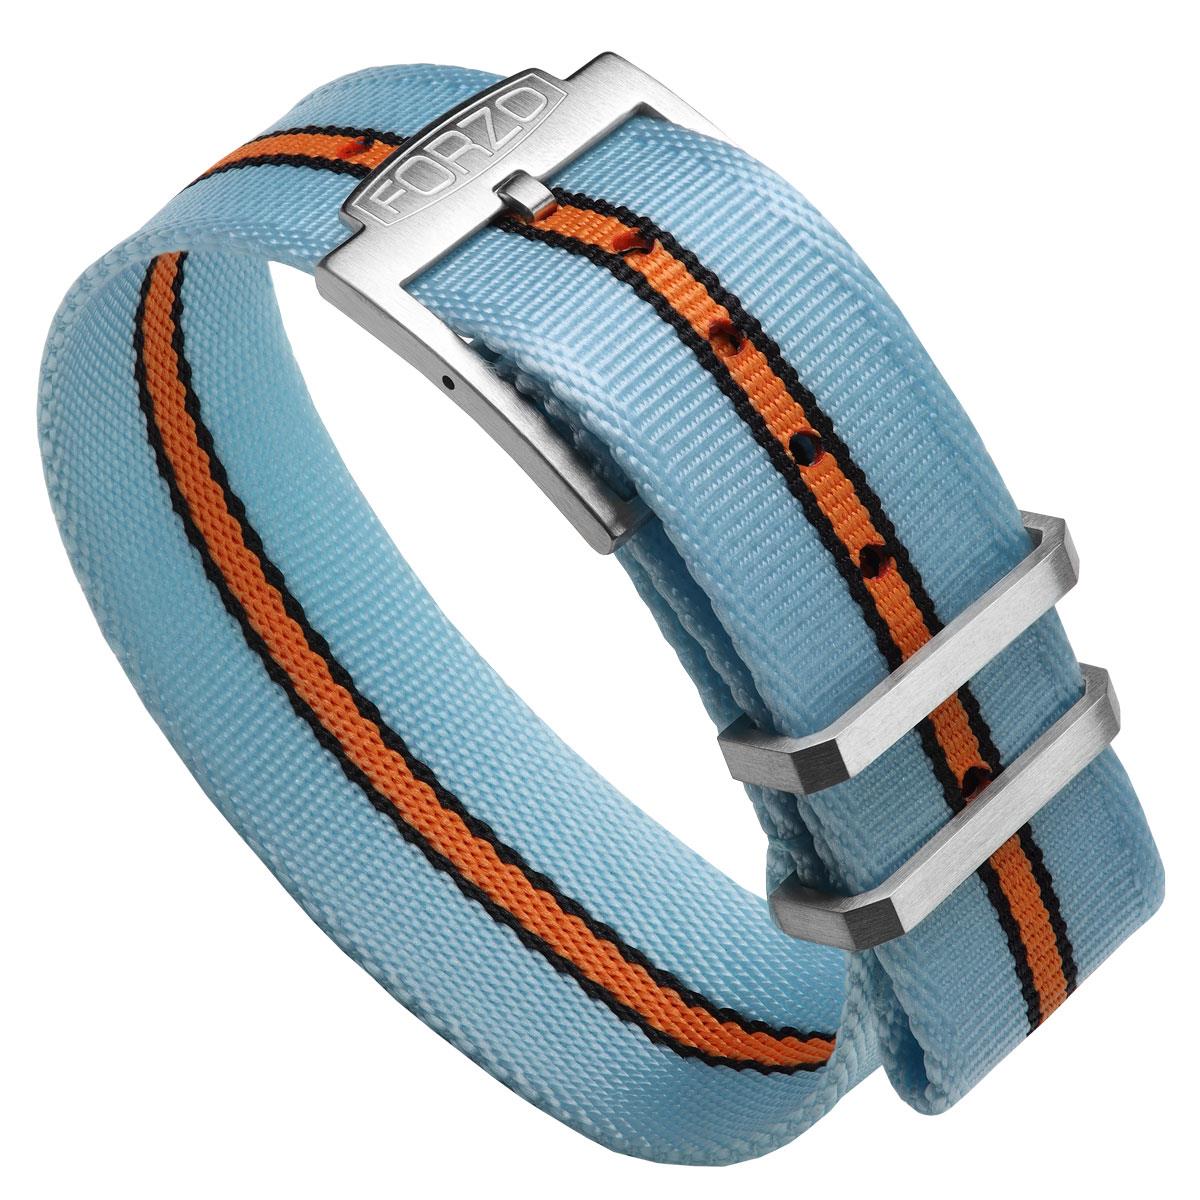 FORZO Racing SP Nylon Watch Strap - Light Blue with Racing Stripes